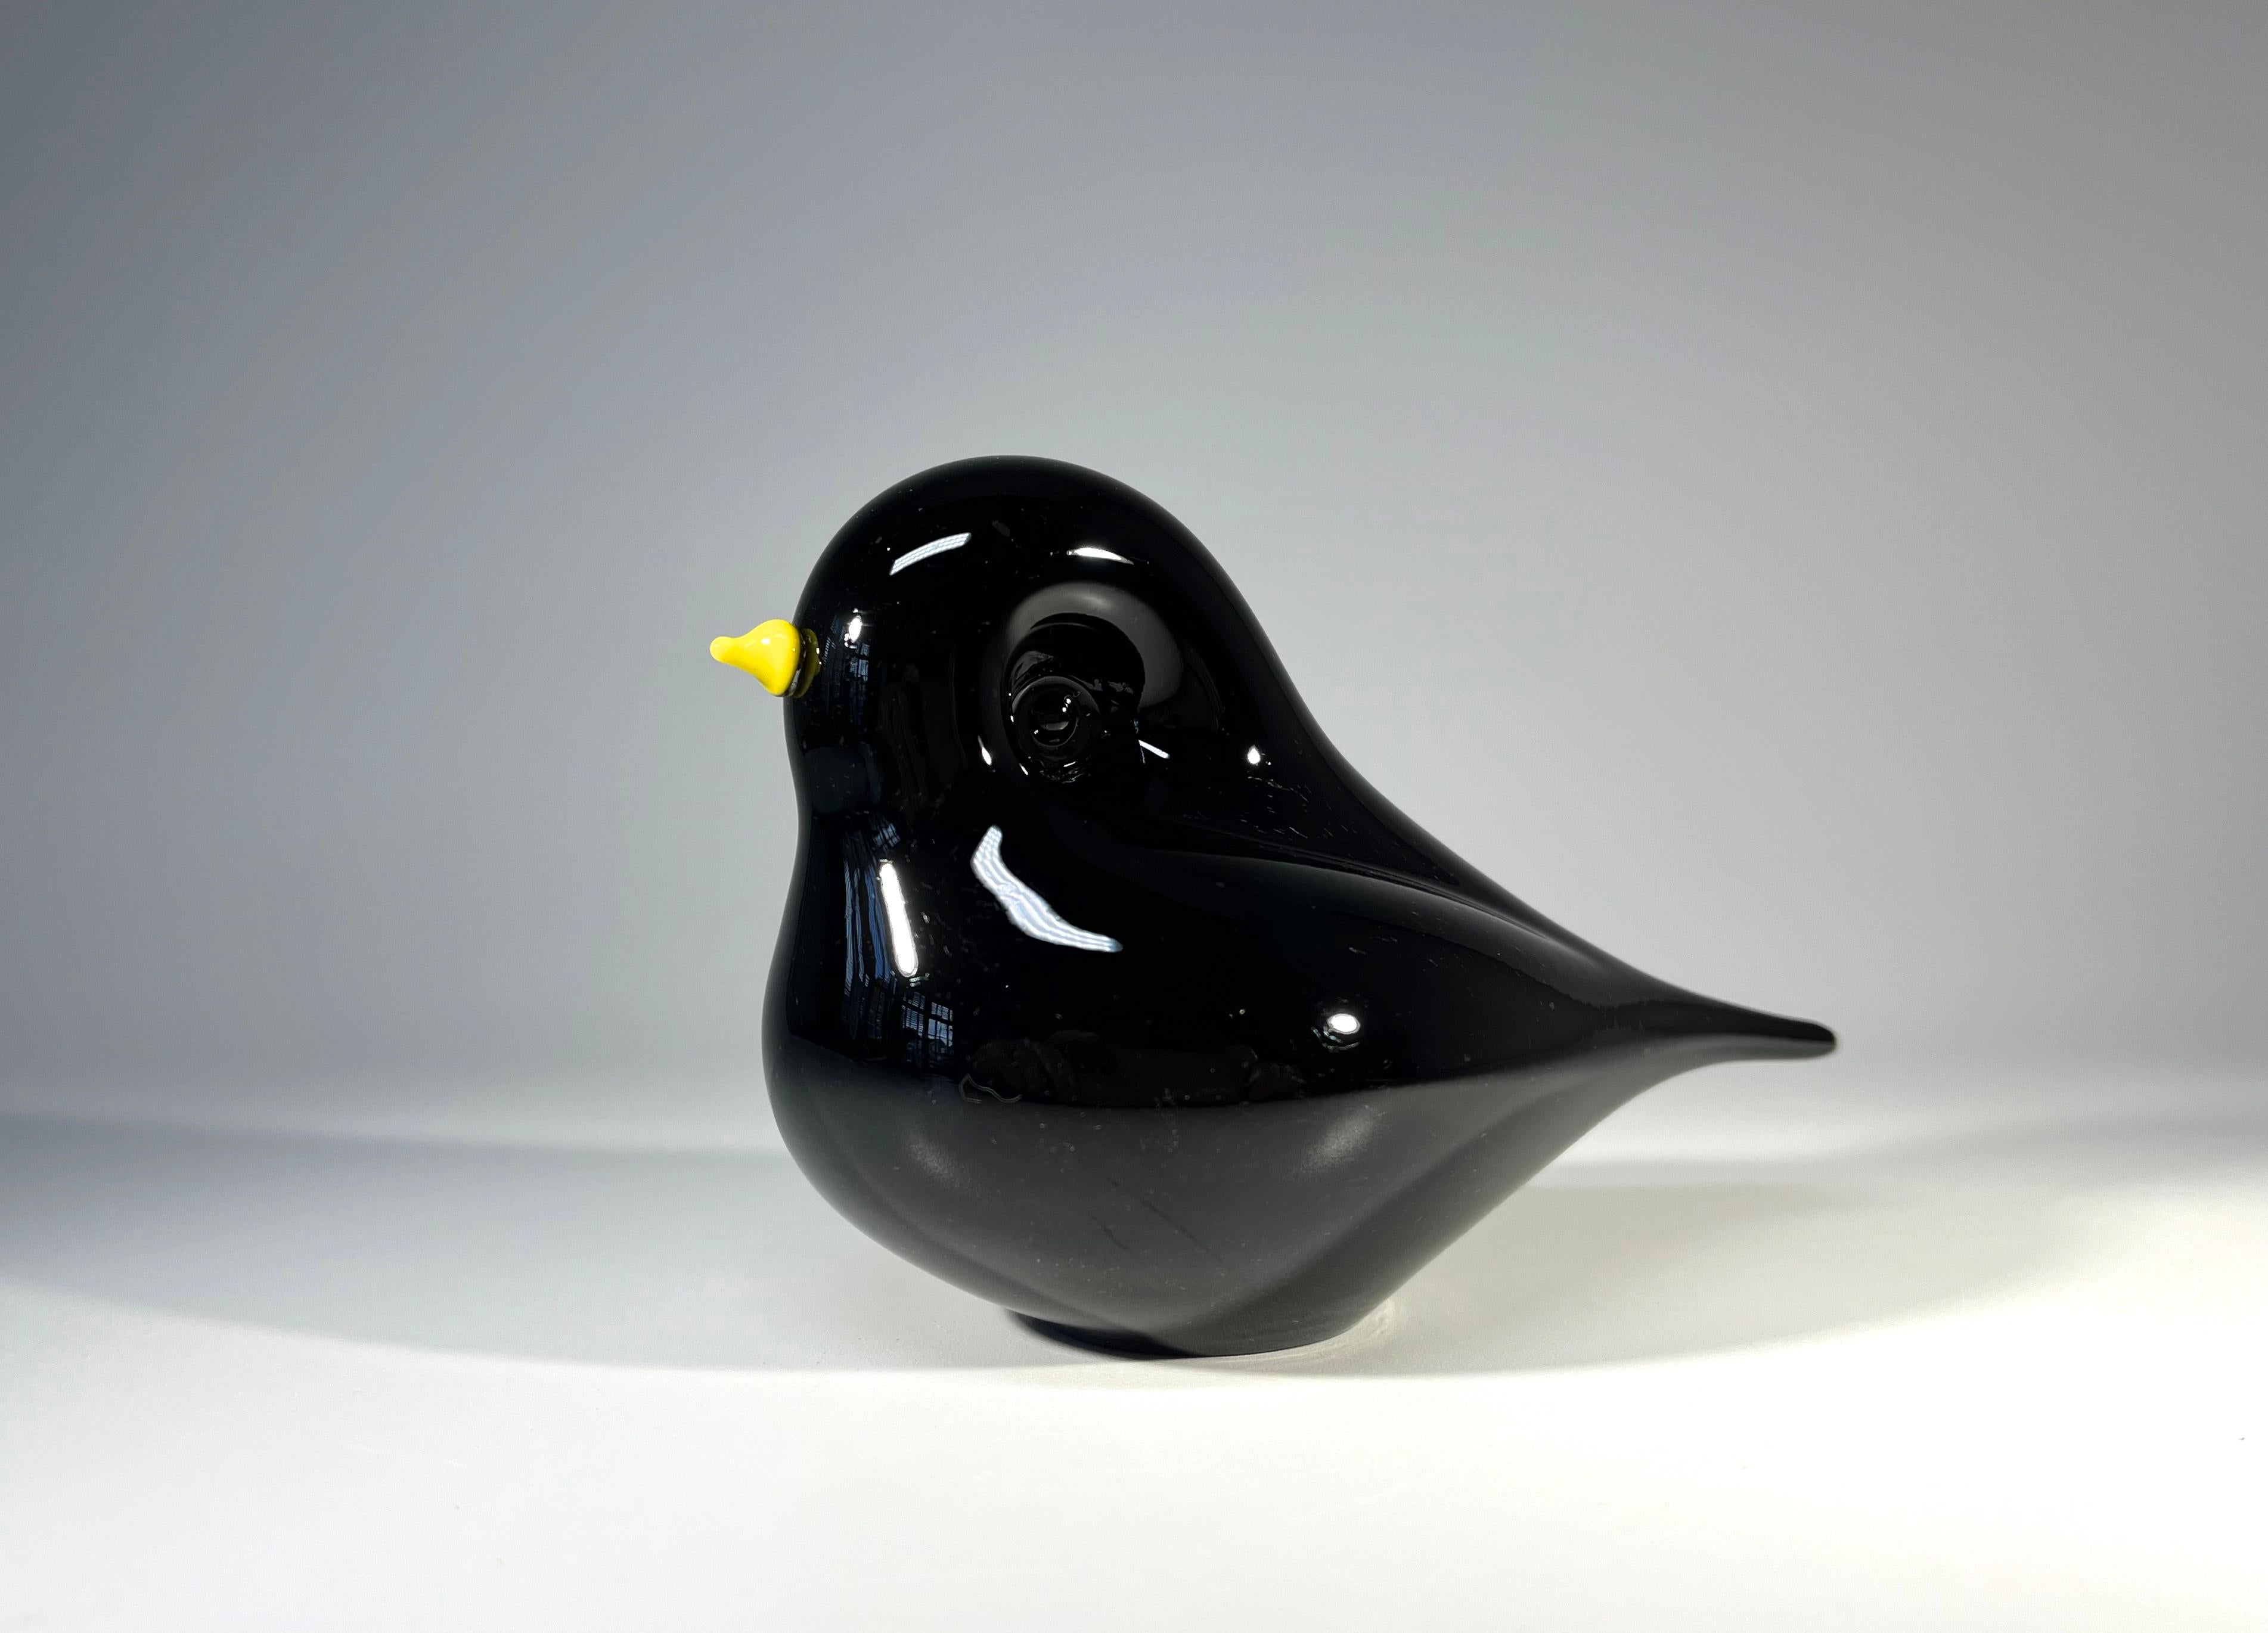 The sweetest of hand blown glass songbirds by the renowned glass artist, Mike Hunter of Twists Studio in Scotland
Solid black as night glass, with a bright yellow beak
Signed M Hunter TW514
Circa 1998-2020
Height 3 inch, Width 2.25 inch, Length 4.75